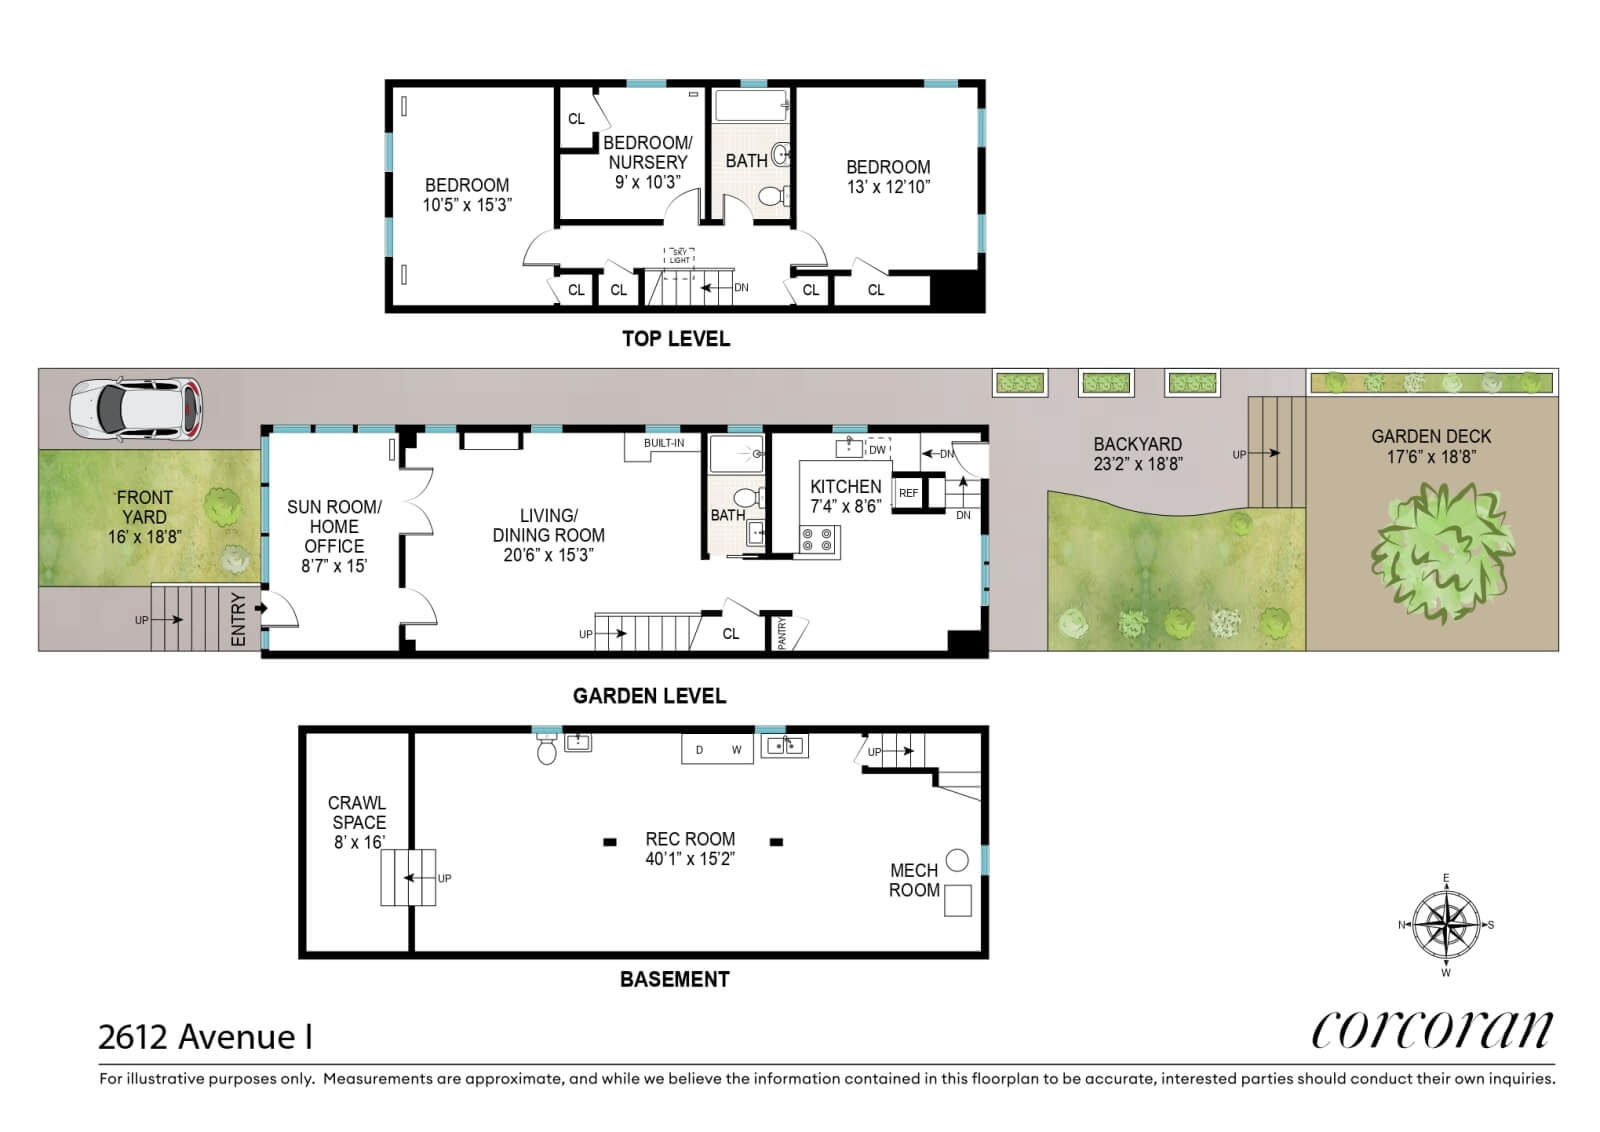 proposed floor plan for 2612 avenue I in midwood